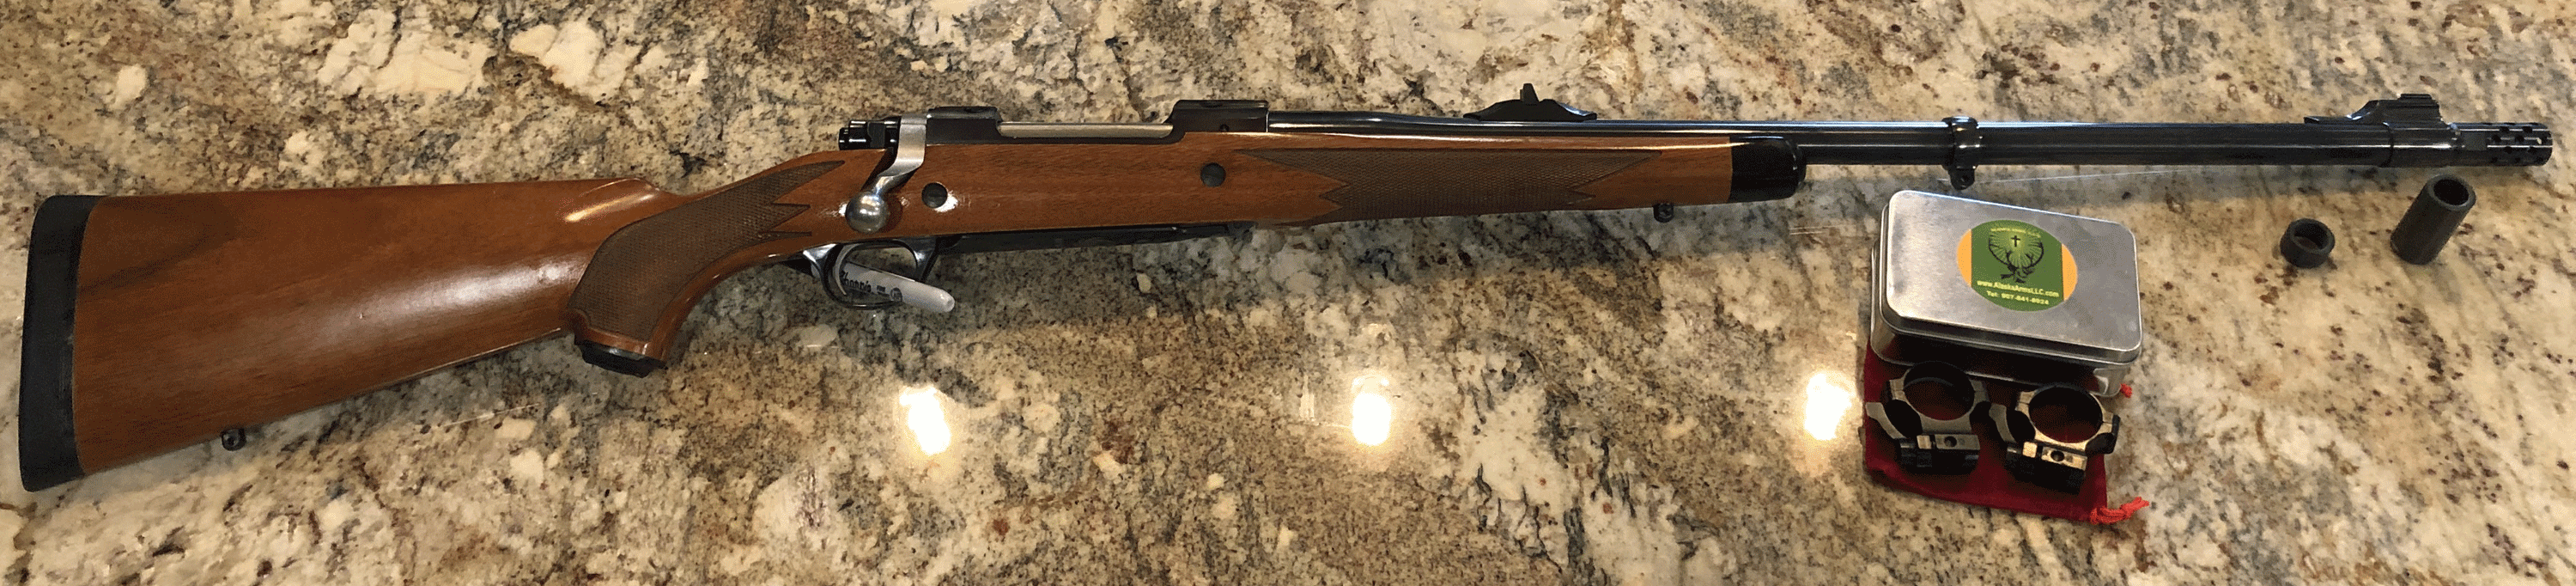 .416 Ruger Rifle